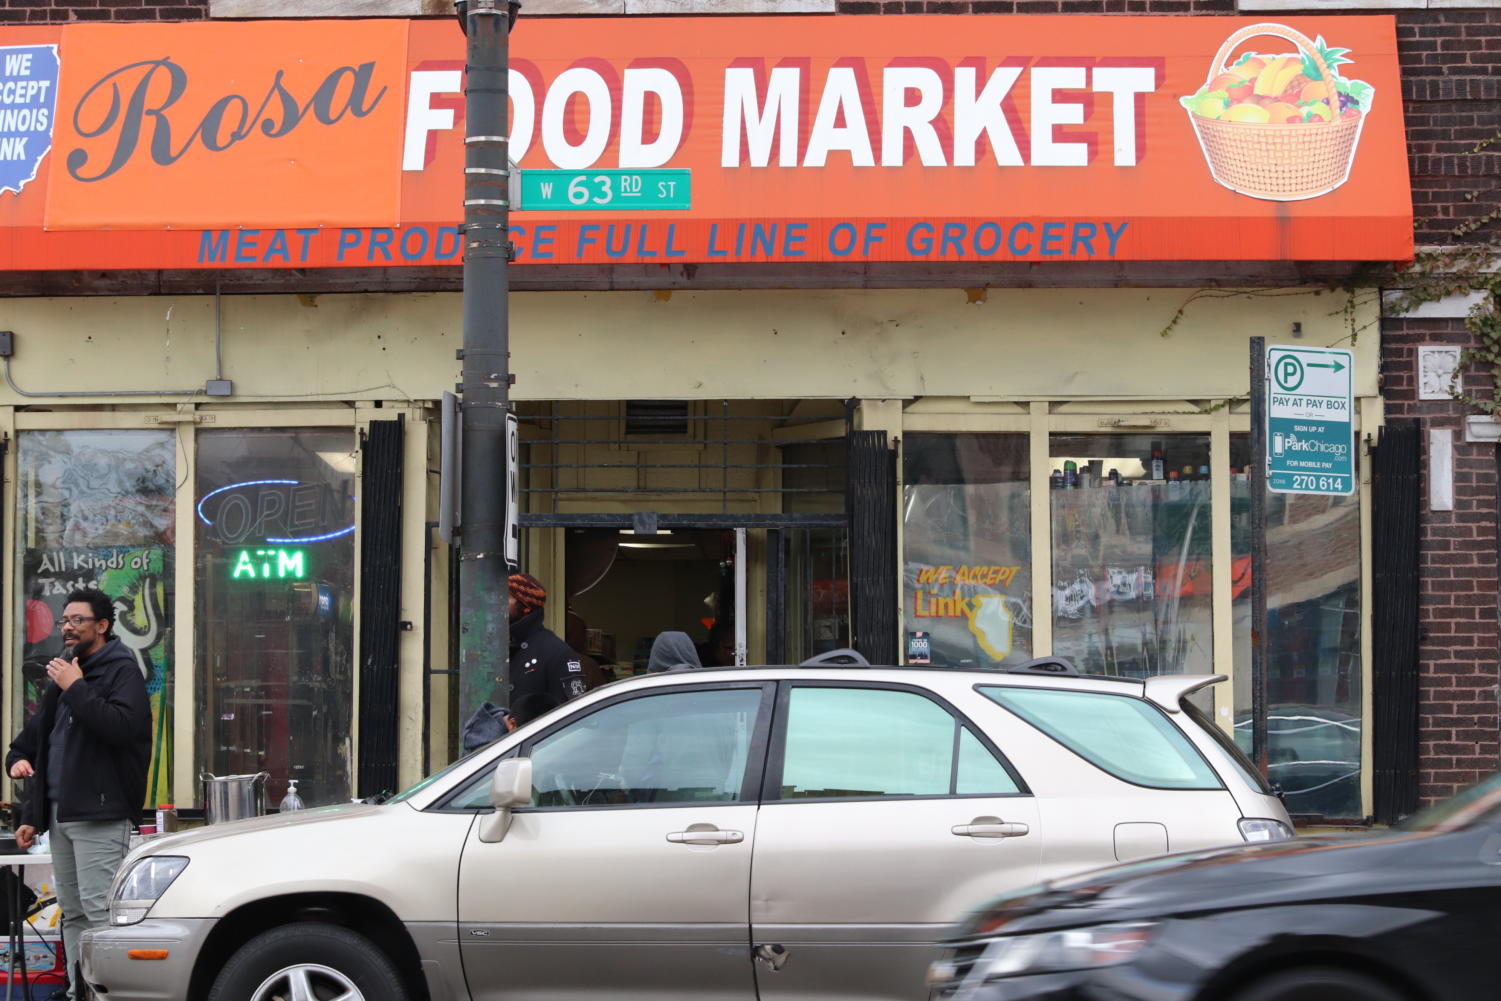 Rosa Food Market at West 63rd Street and Mozart, owned and run by Kanan Askhar, a Palestinian-American immigrant.